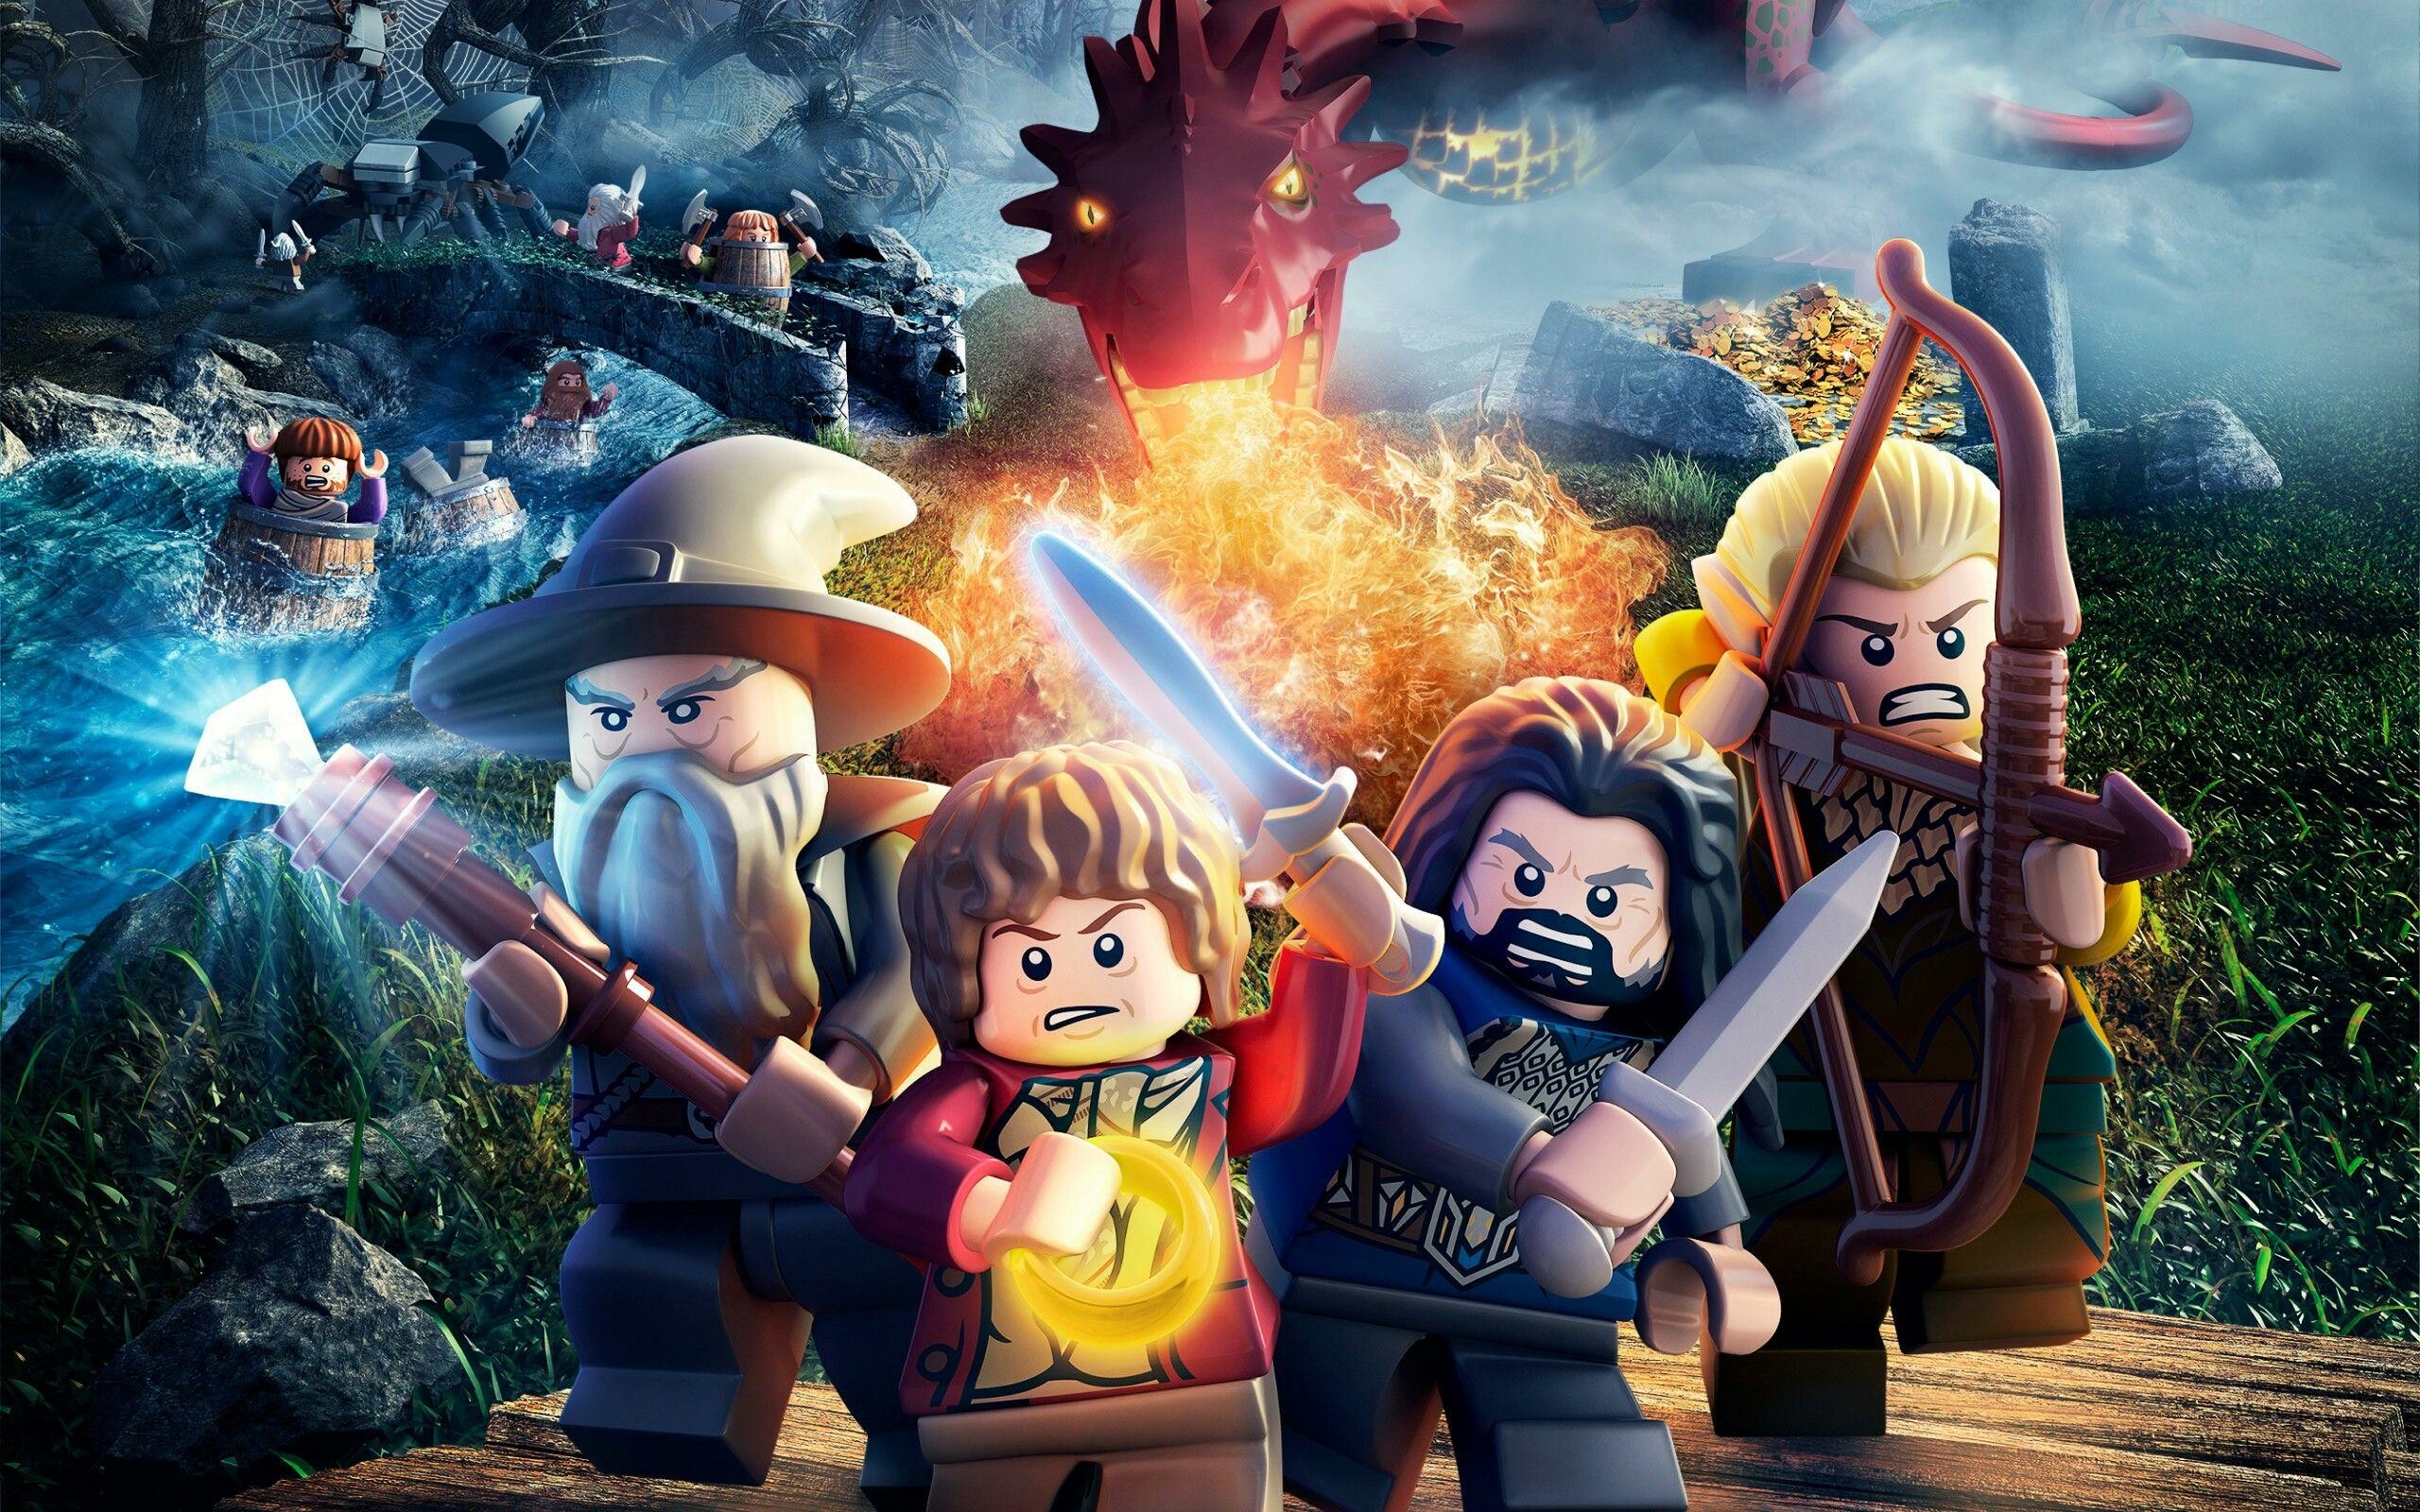 Lego: Used to create scenes from movies or stories, The Hobbit. 2560x1600 HD Wallpaper.